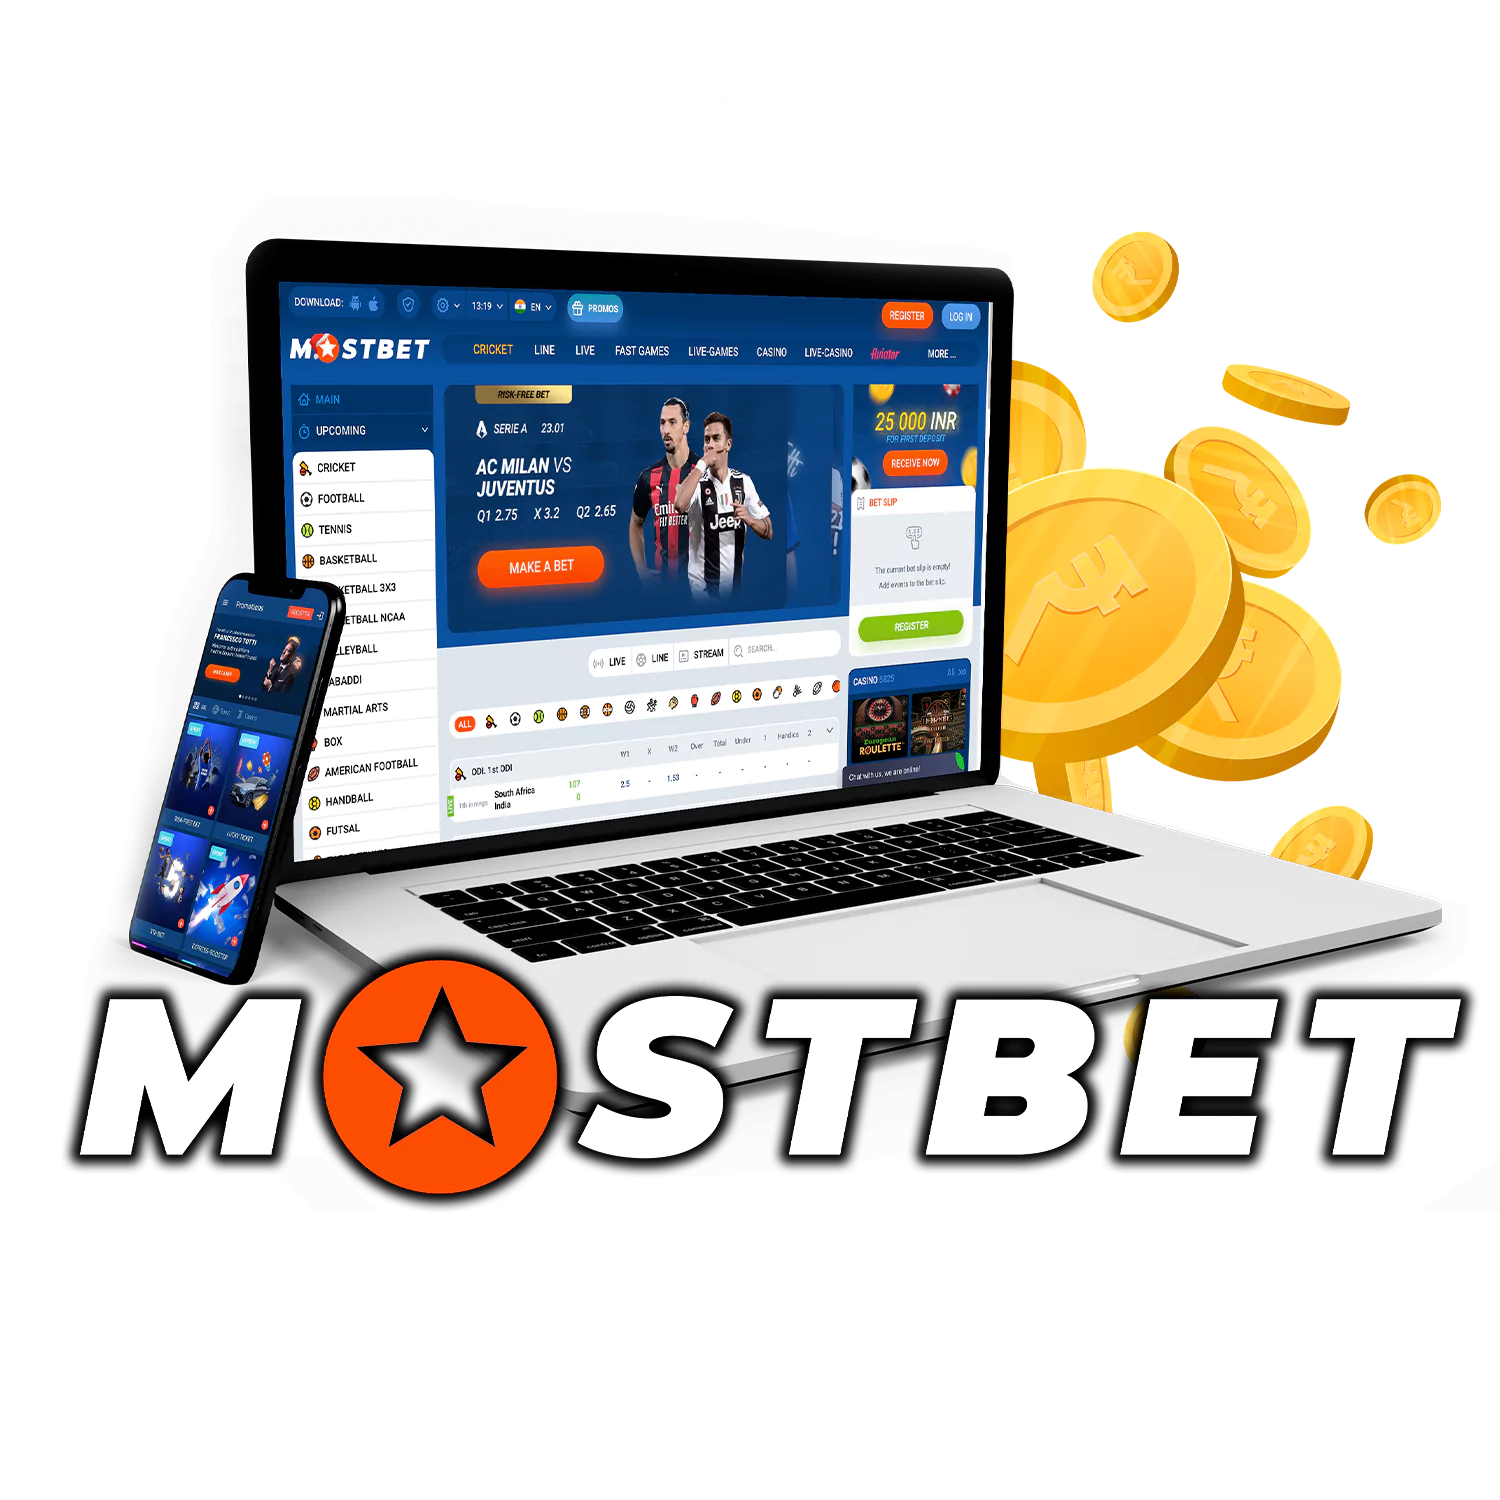 10 Things You Have In Common With Mostbet online casino in Vietnam